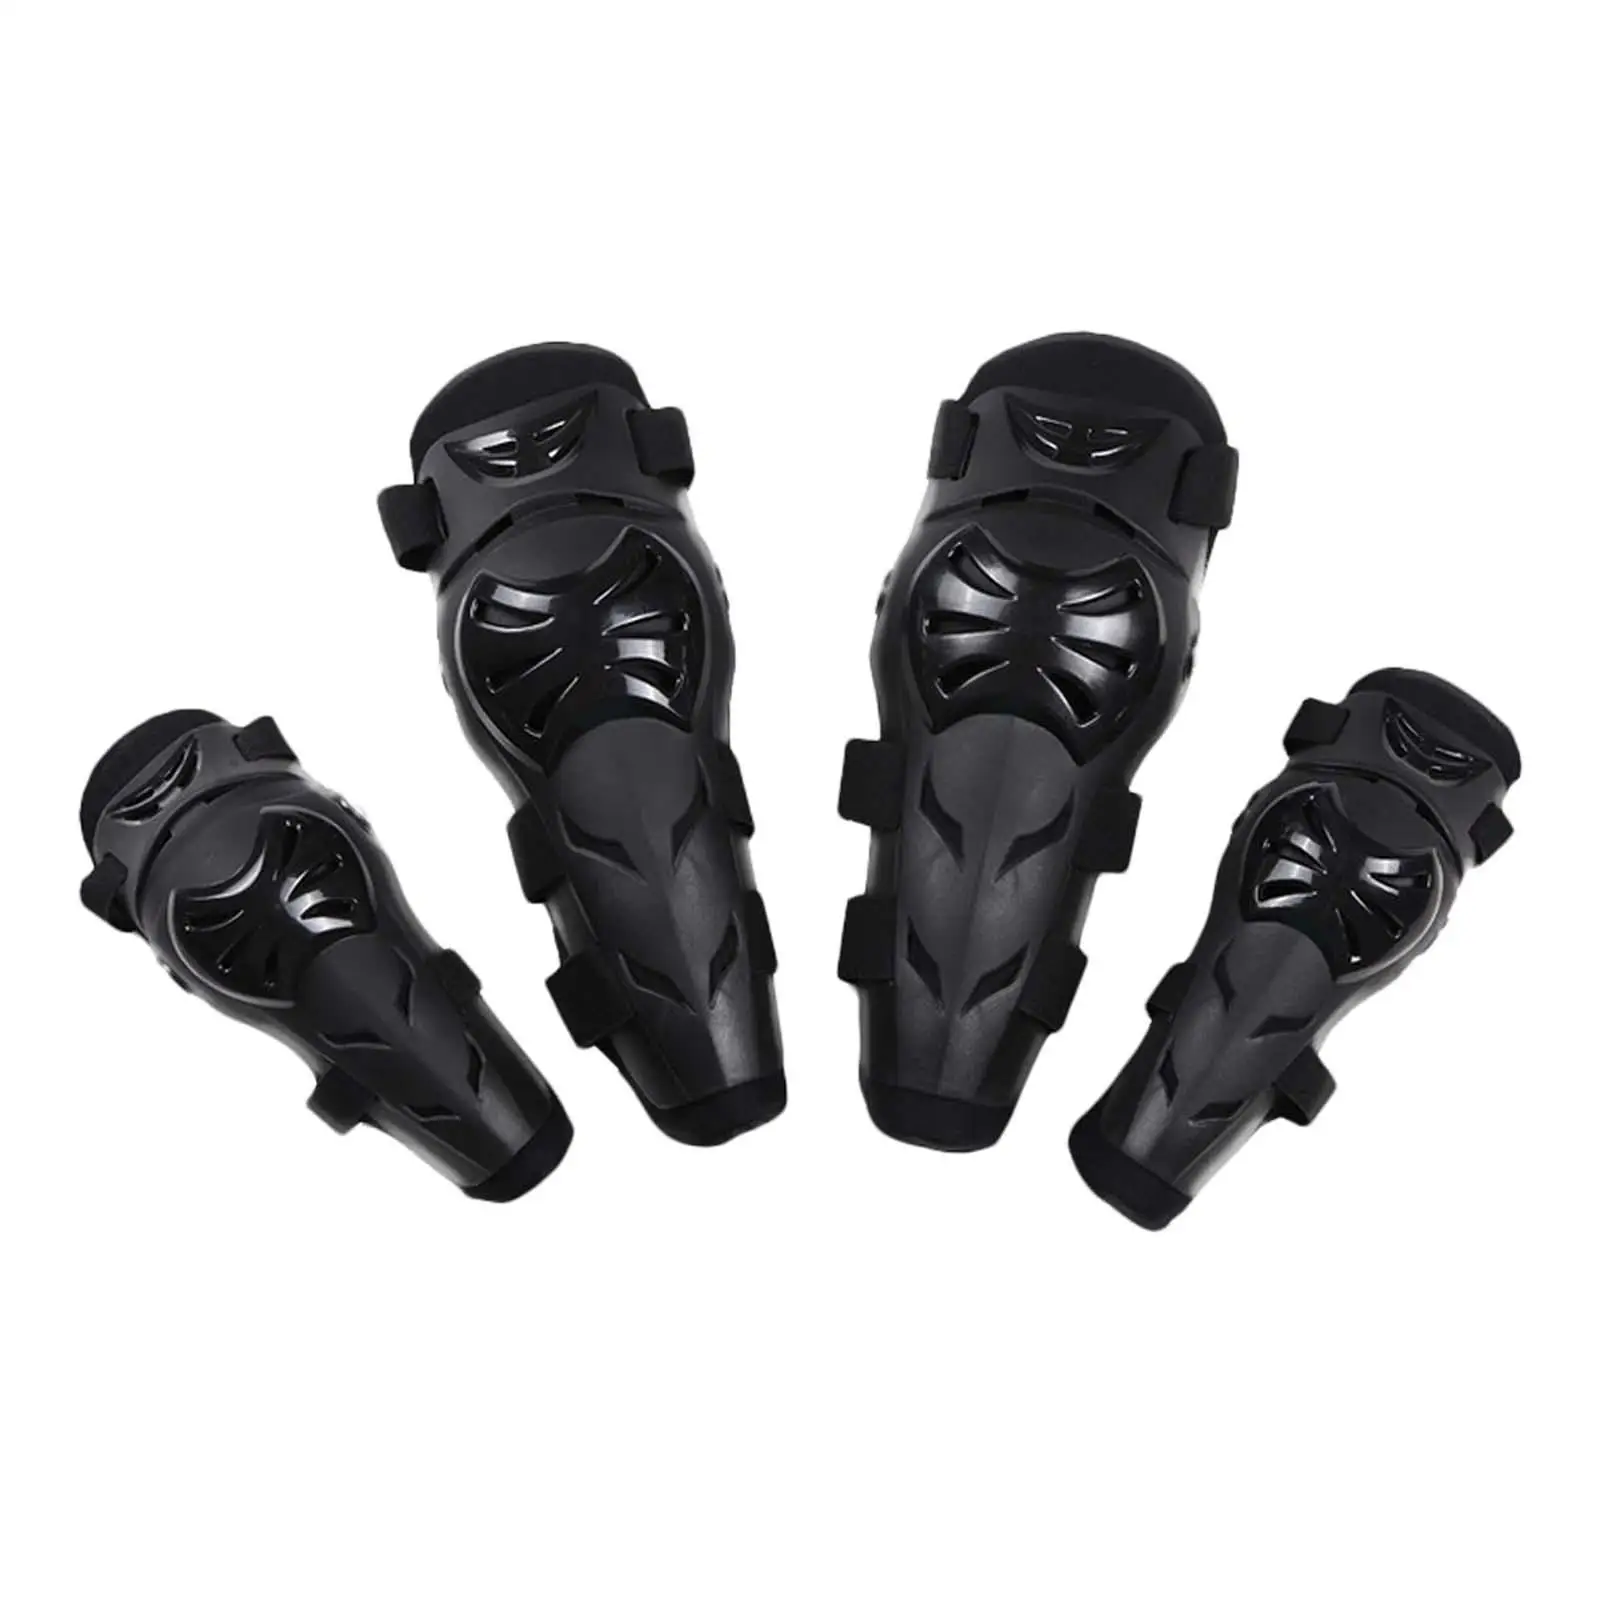 4x Motocross Elbow Knee Shin Guards Cusion for Skateboard Cycling Sport